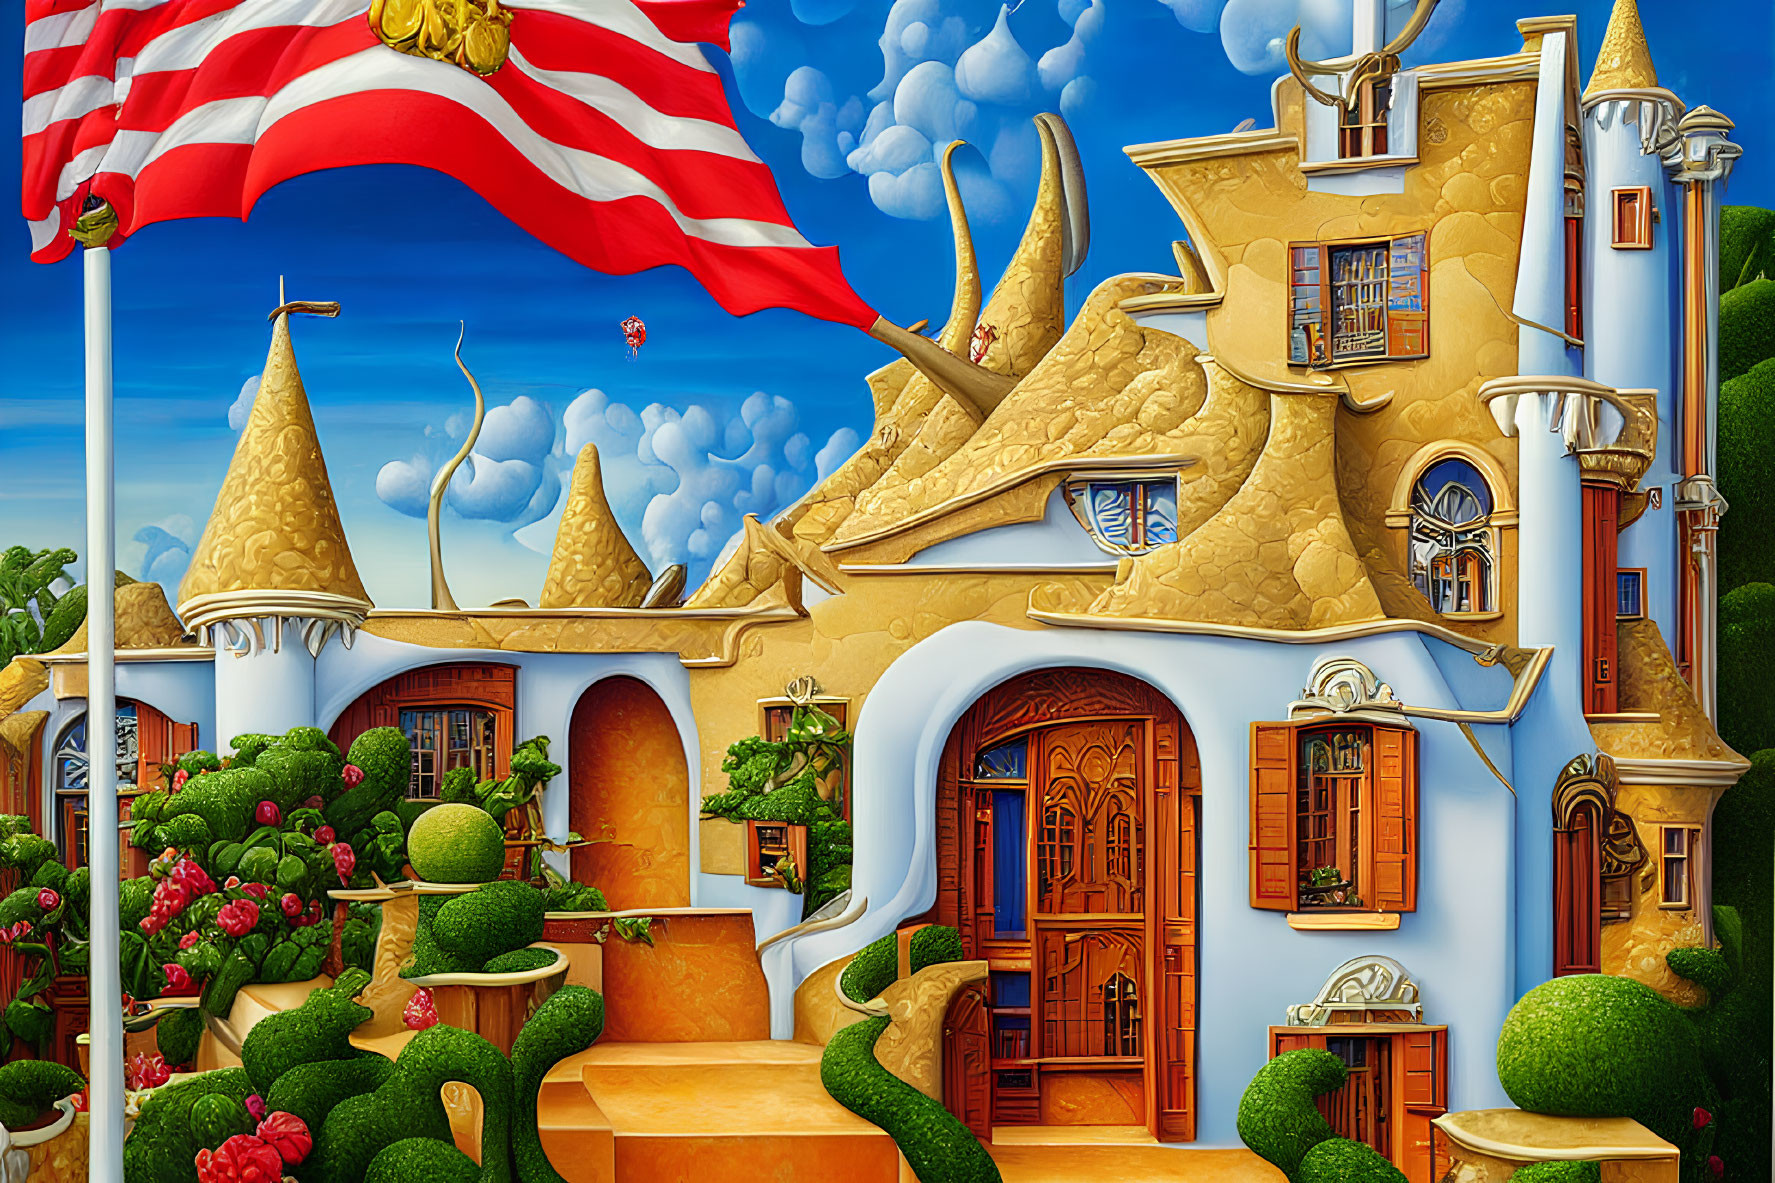 Illustration of fairy-tale castle with golden walls, turrets, American flag, greenery,